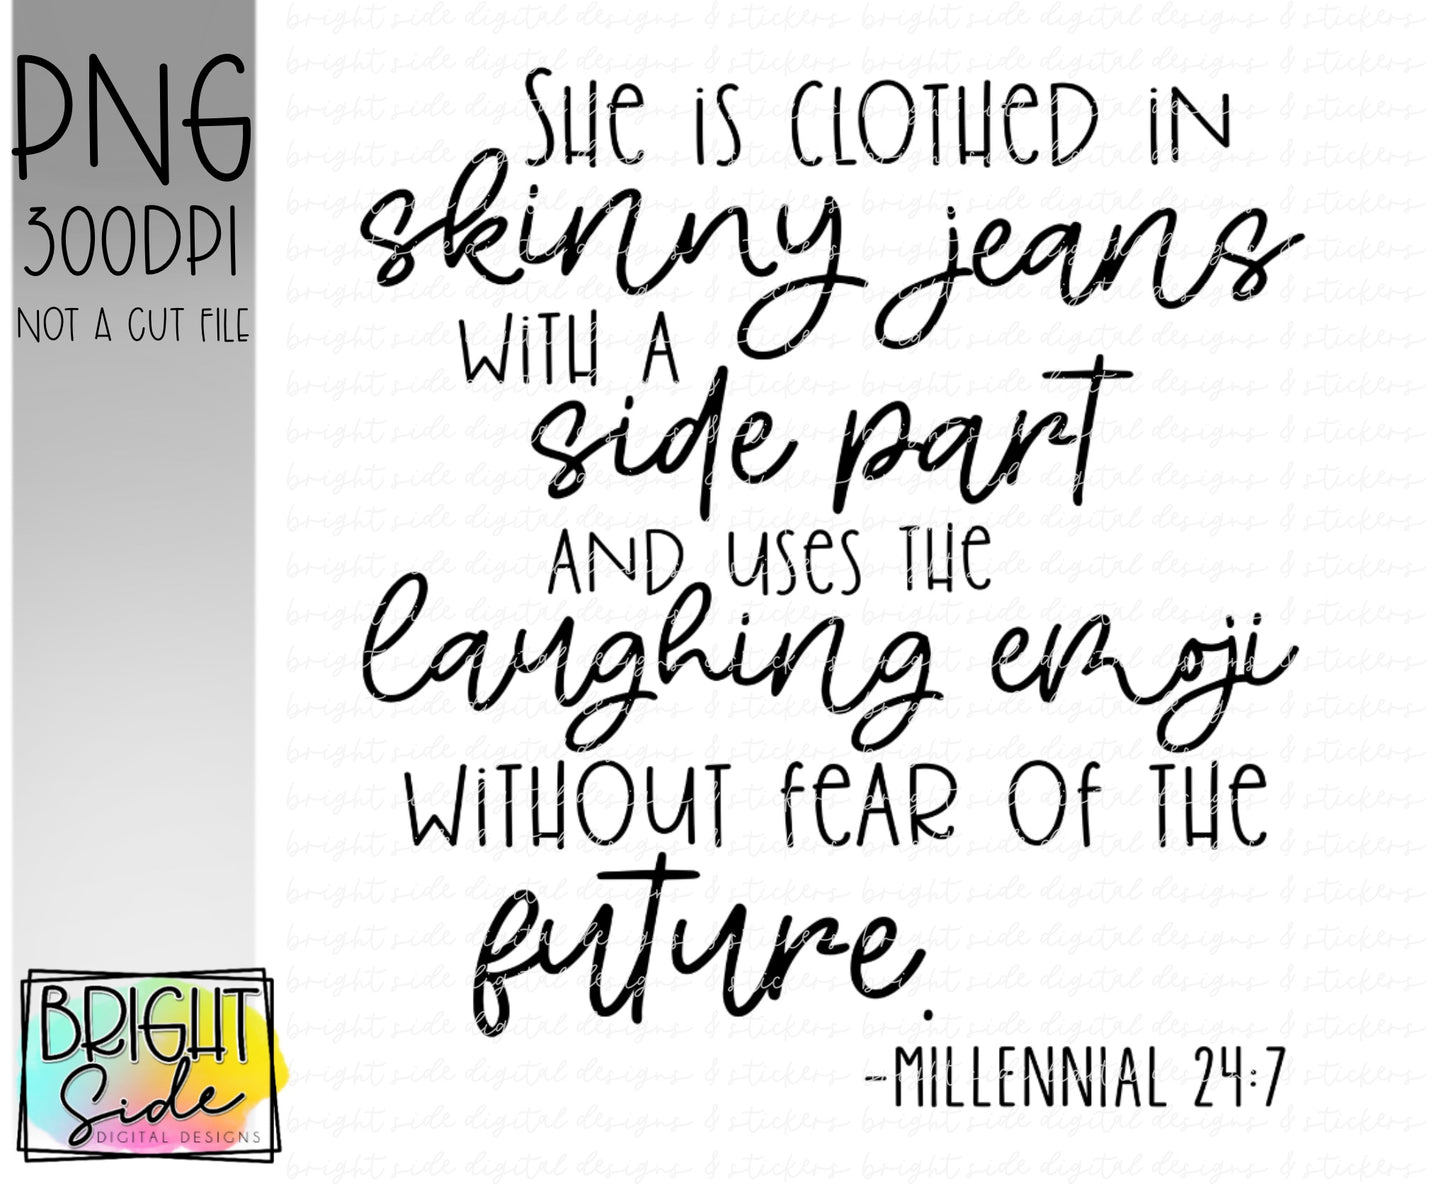 She is clothed in skinny jeans -Millennial 24:7